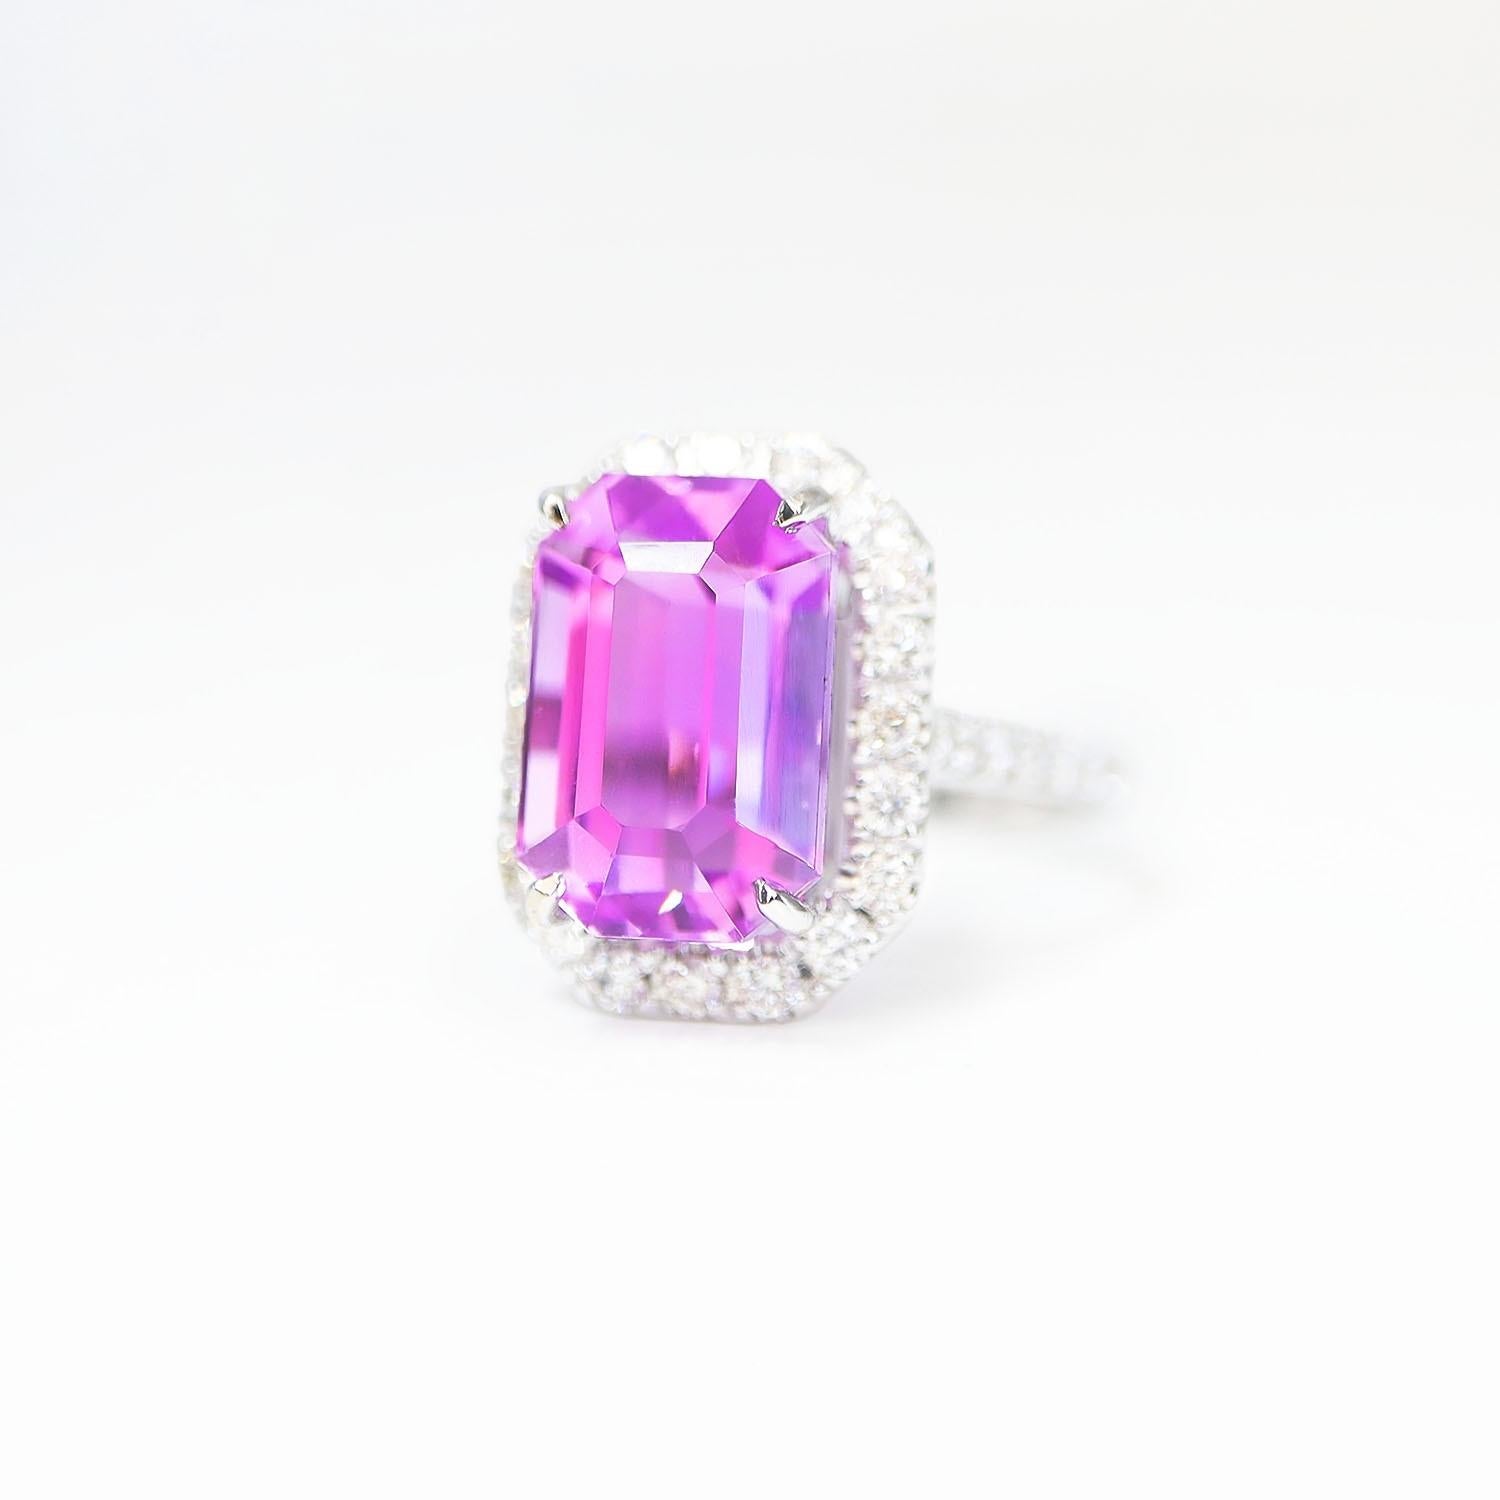 IGI 14K 8.25 ct Kunzite&Diamond Antique Art Deco Engagement Ring In New Condition For Sale In Kaohsiung City, TW